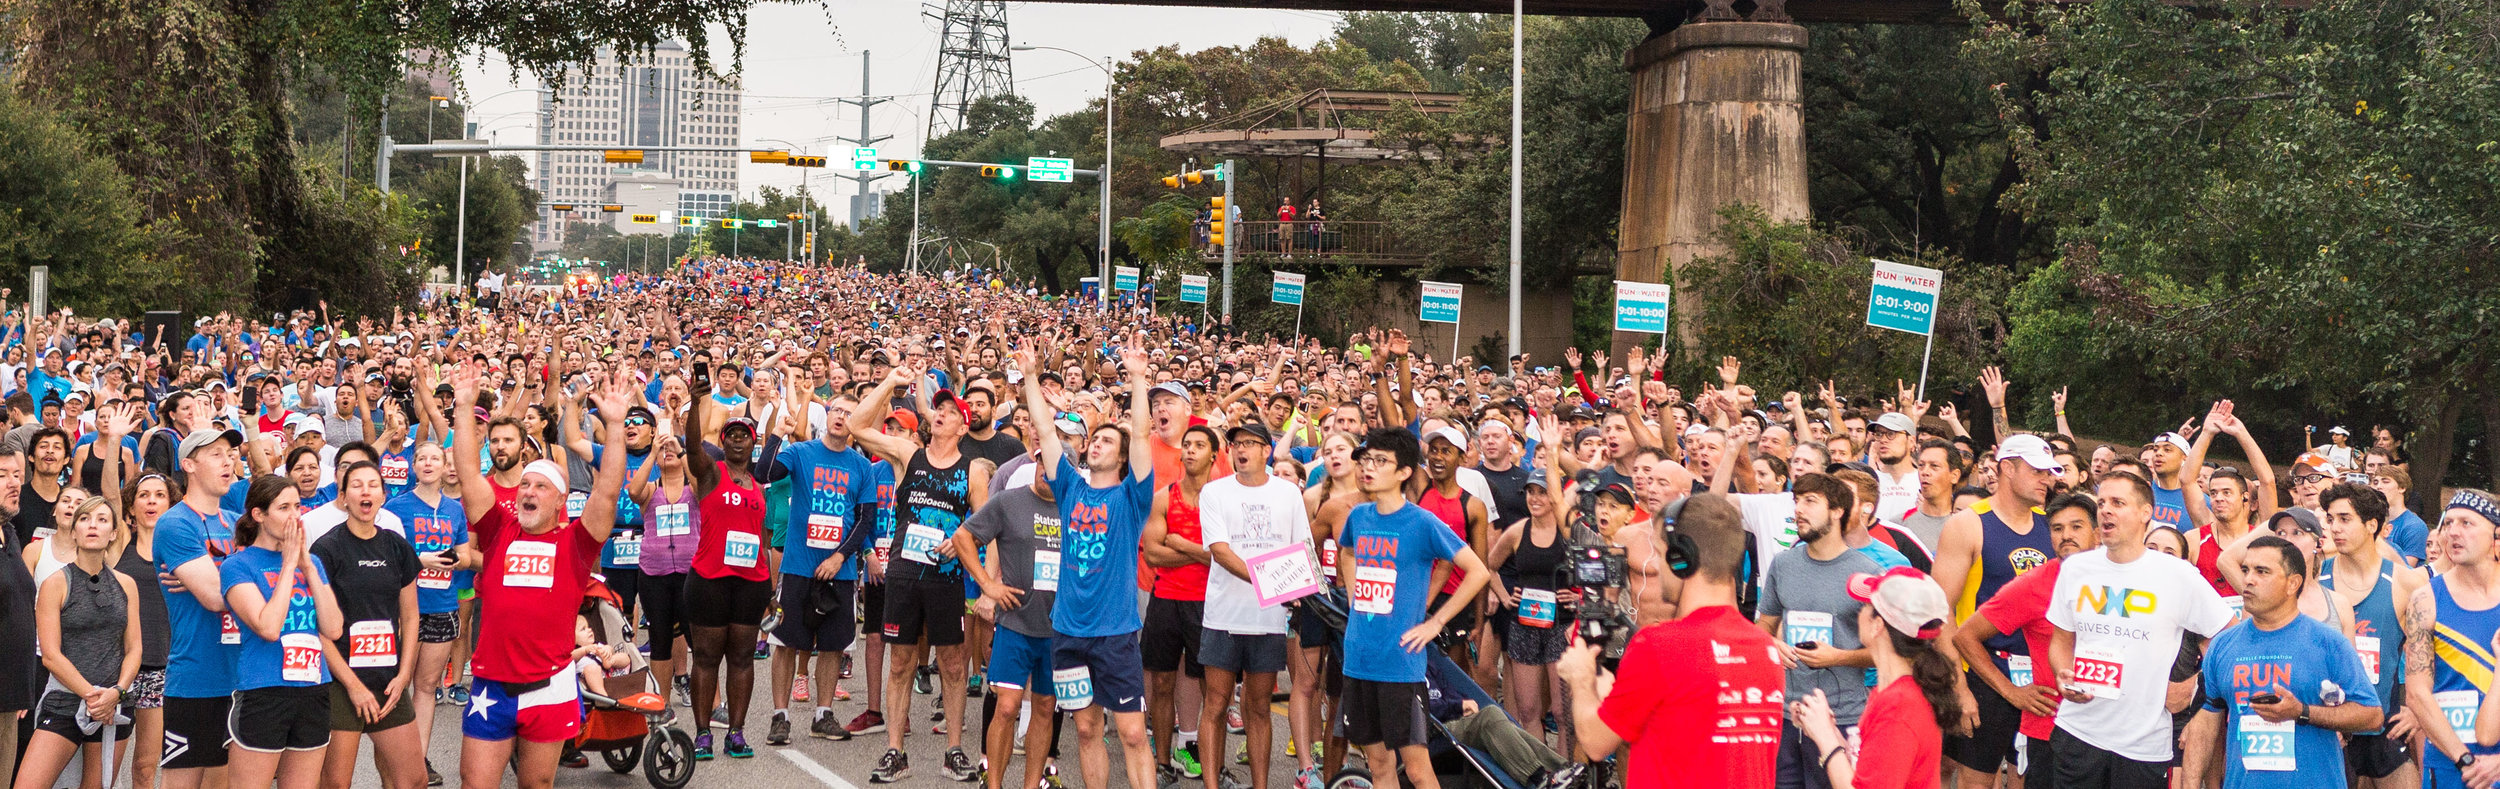 Run For The Water Race Day 2017-5.jpg